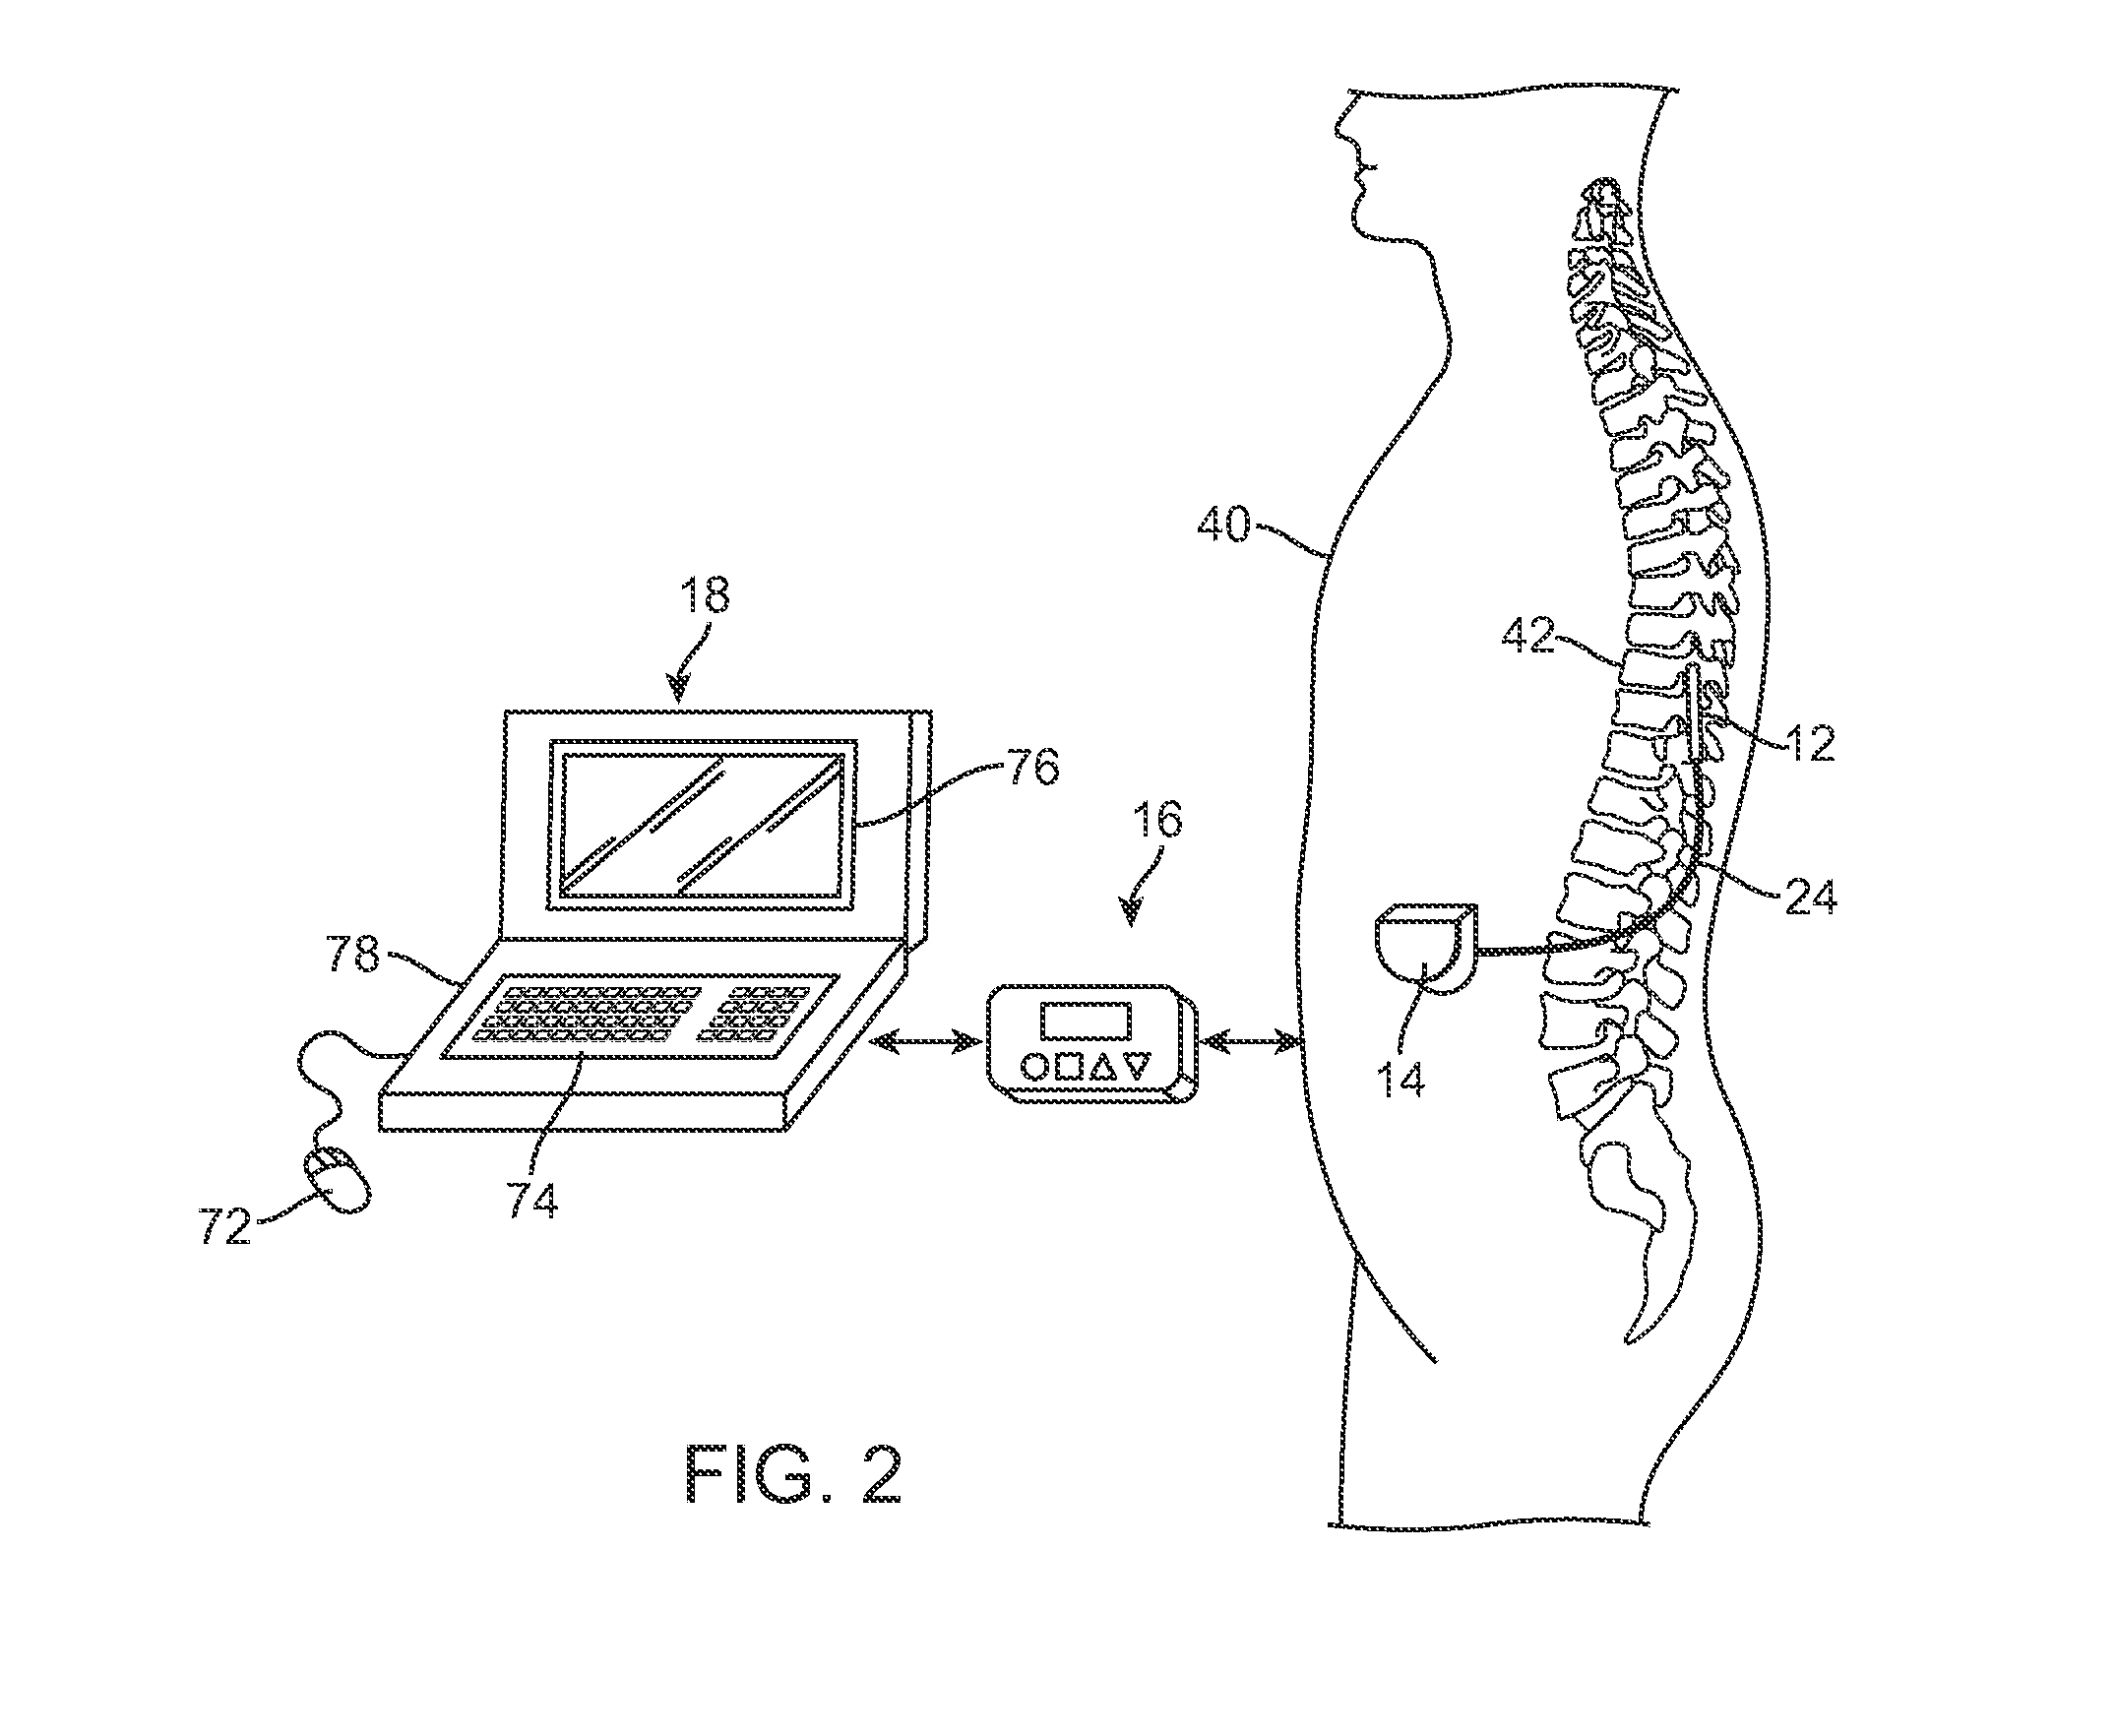 Systems and methods for programming a neuromodulation system